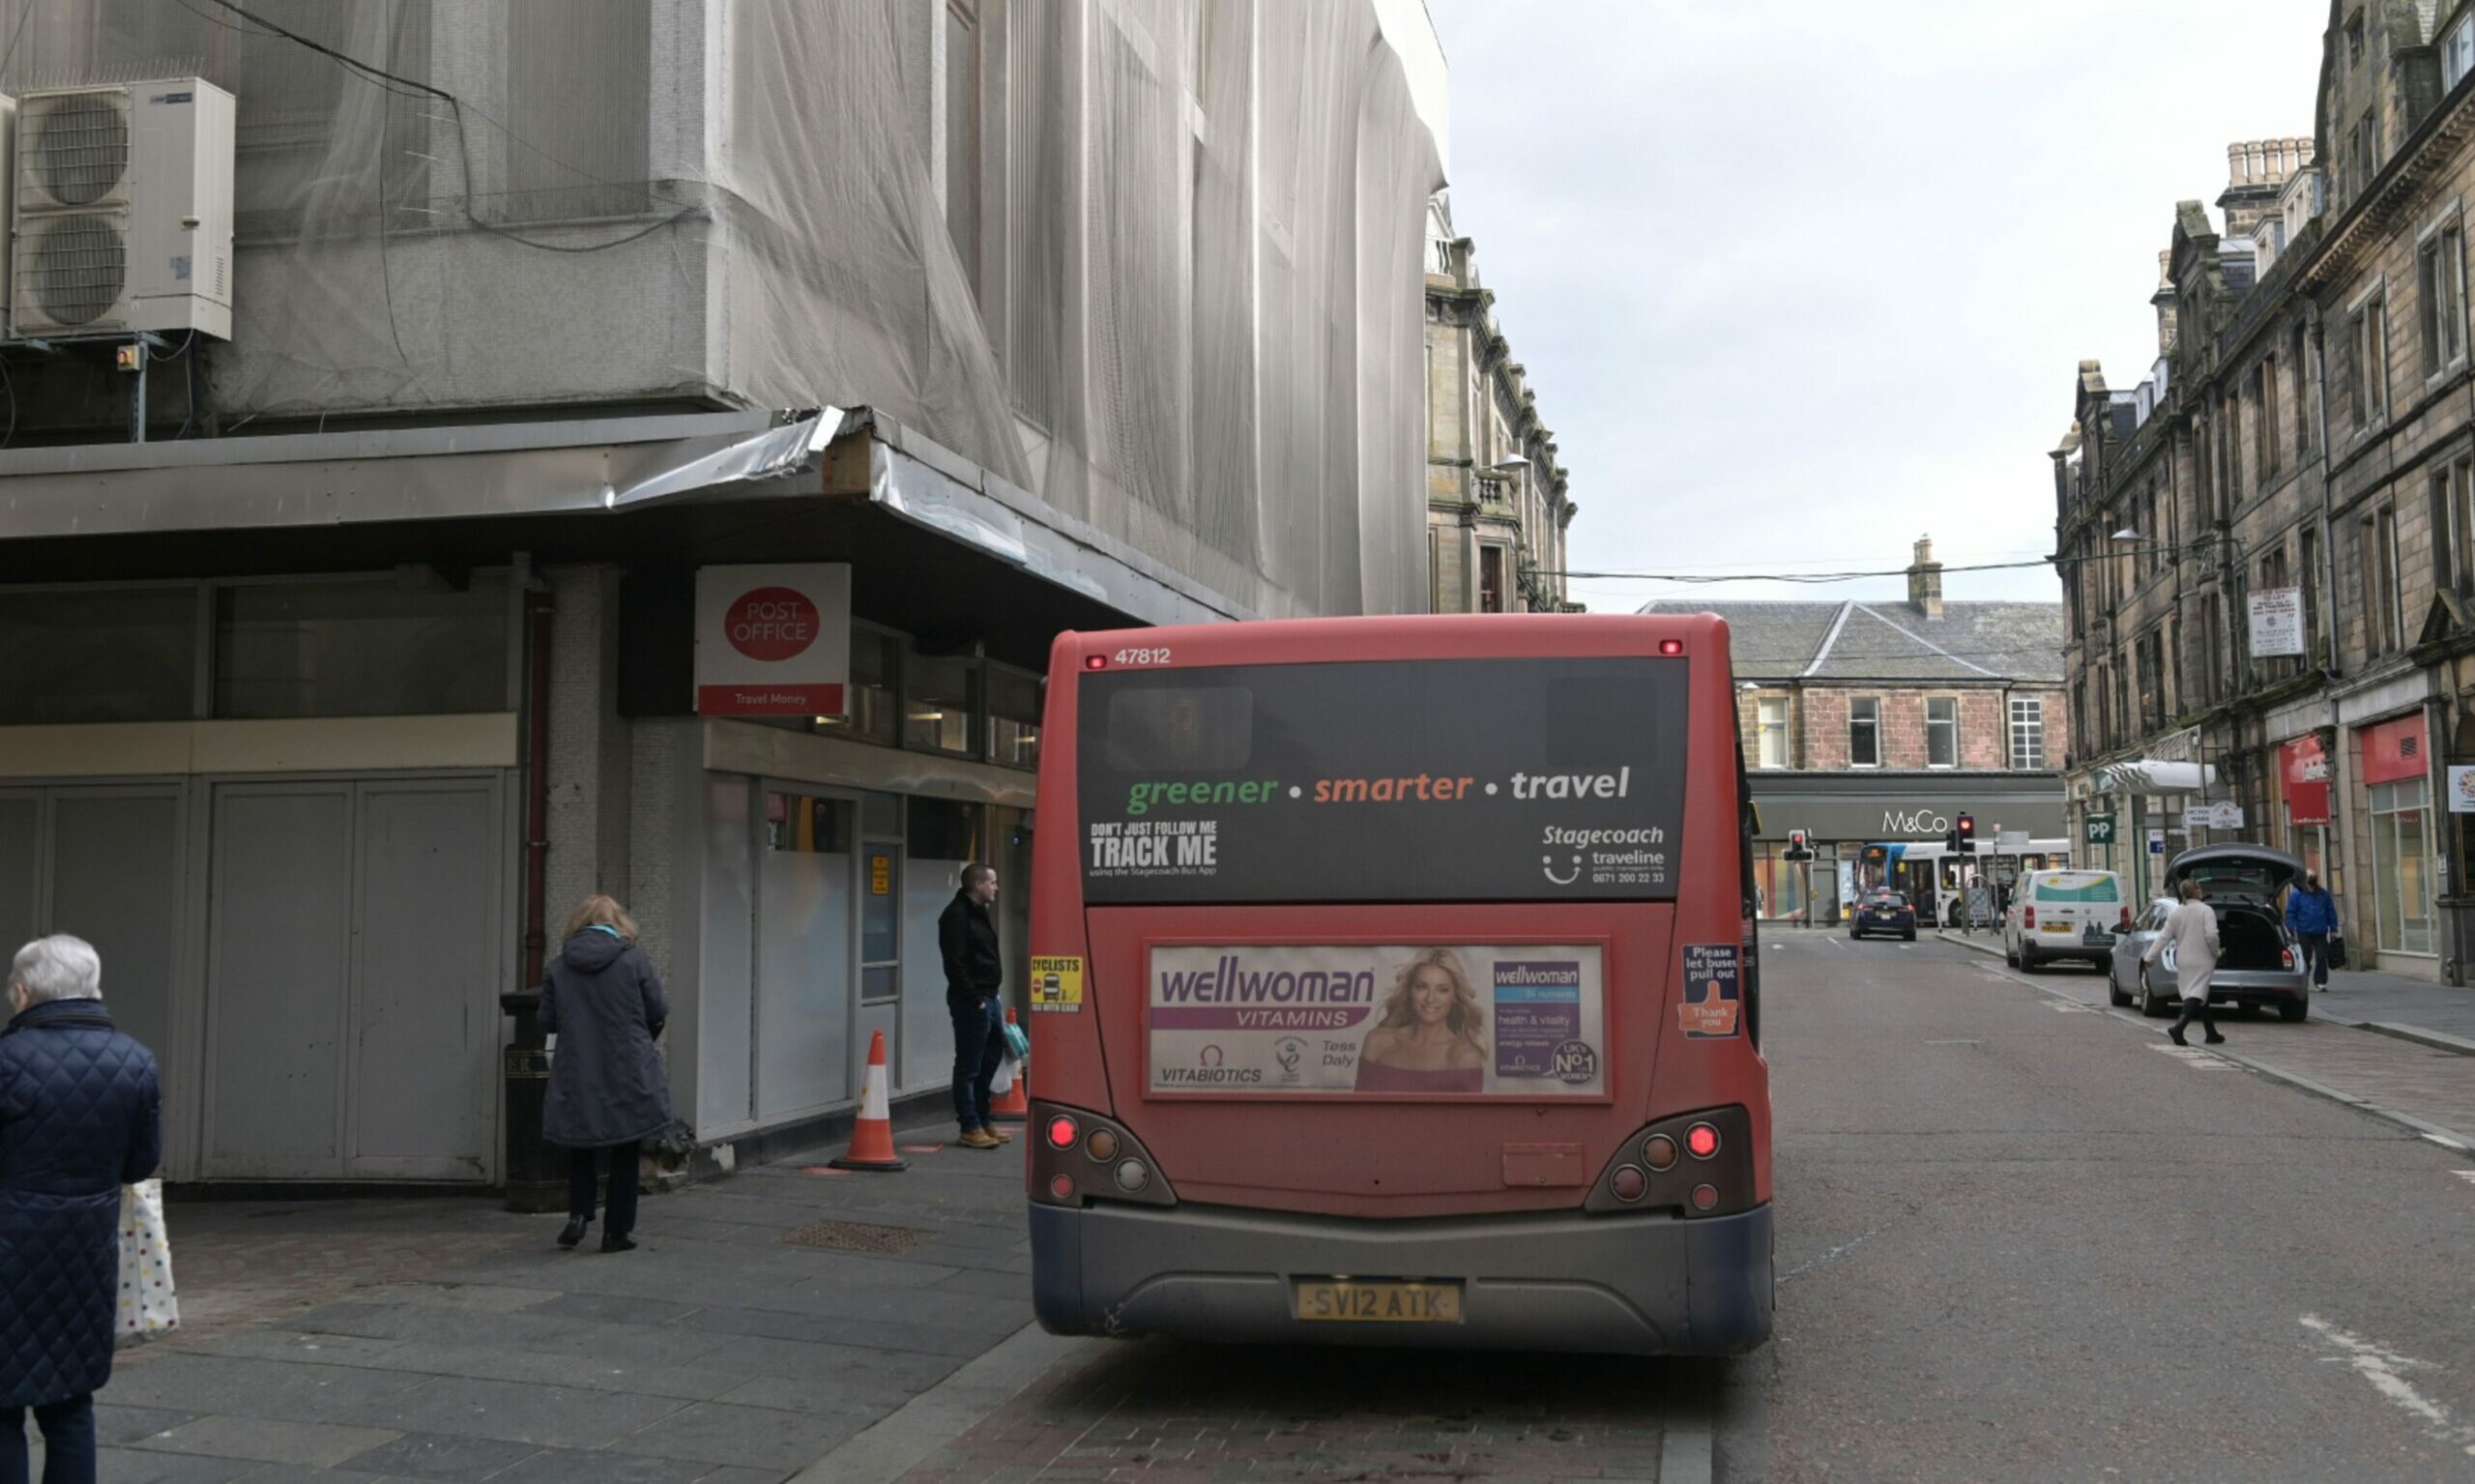 The bus was arriving into Queensgate this morning when it crashed into the city centre building.